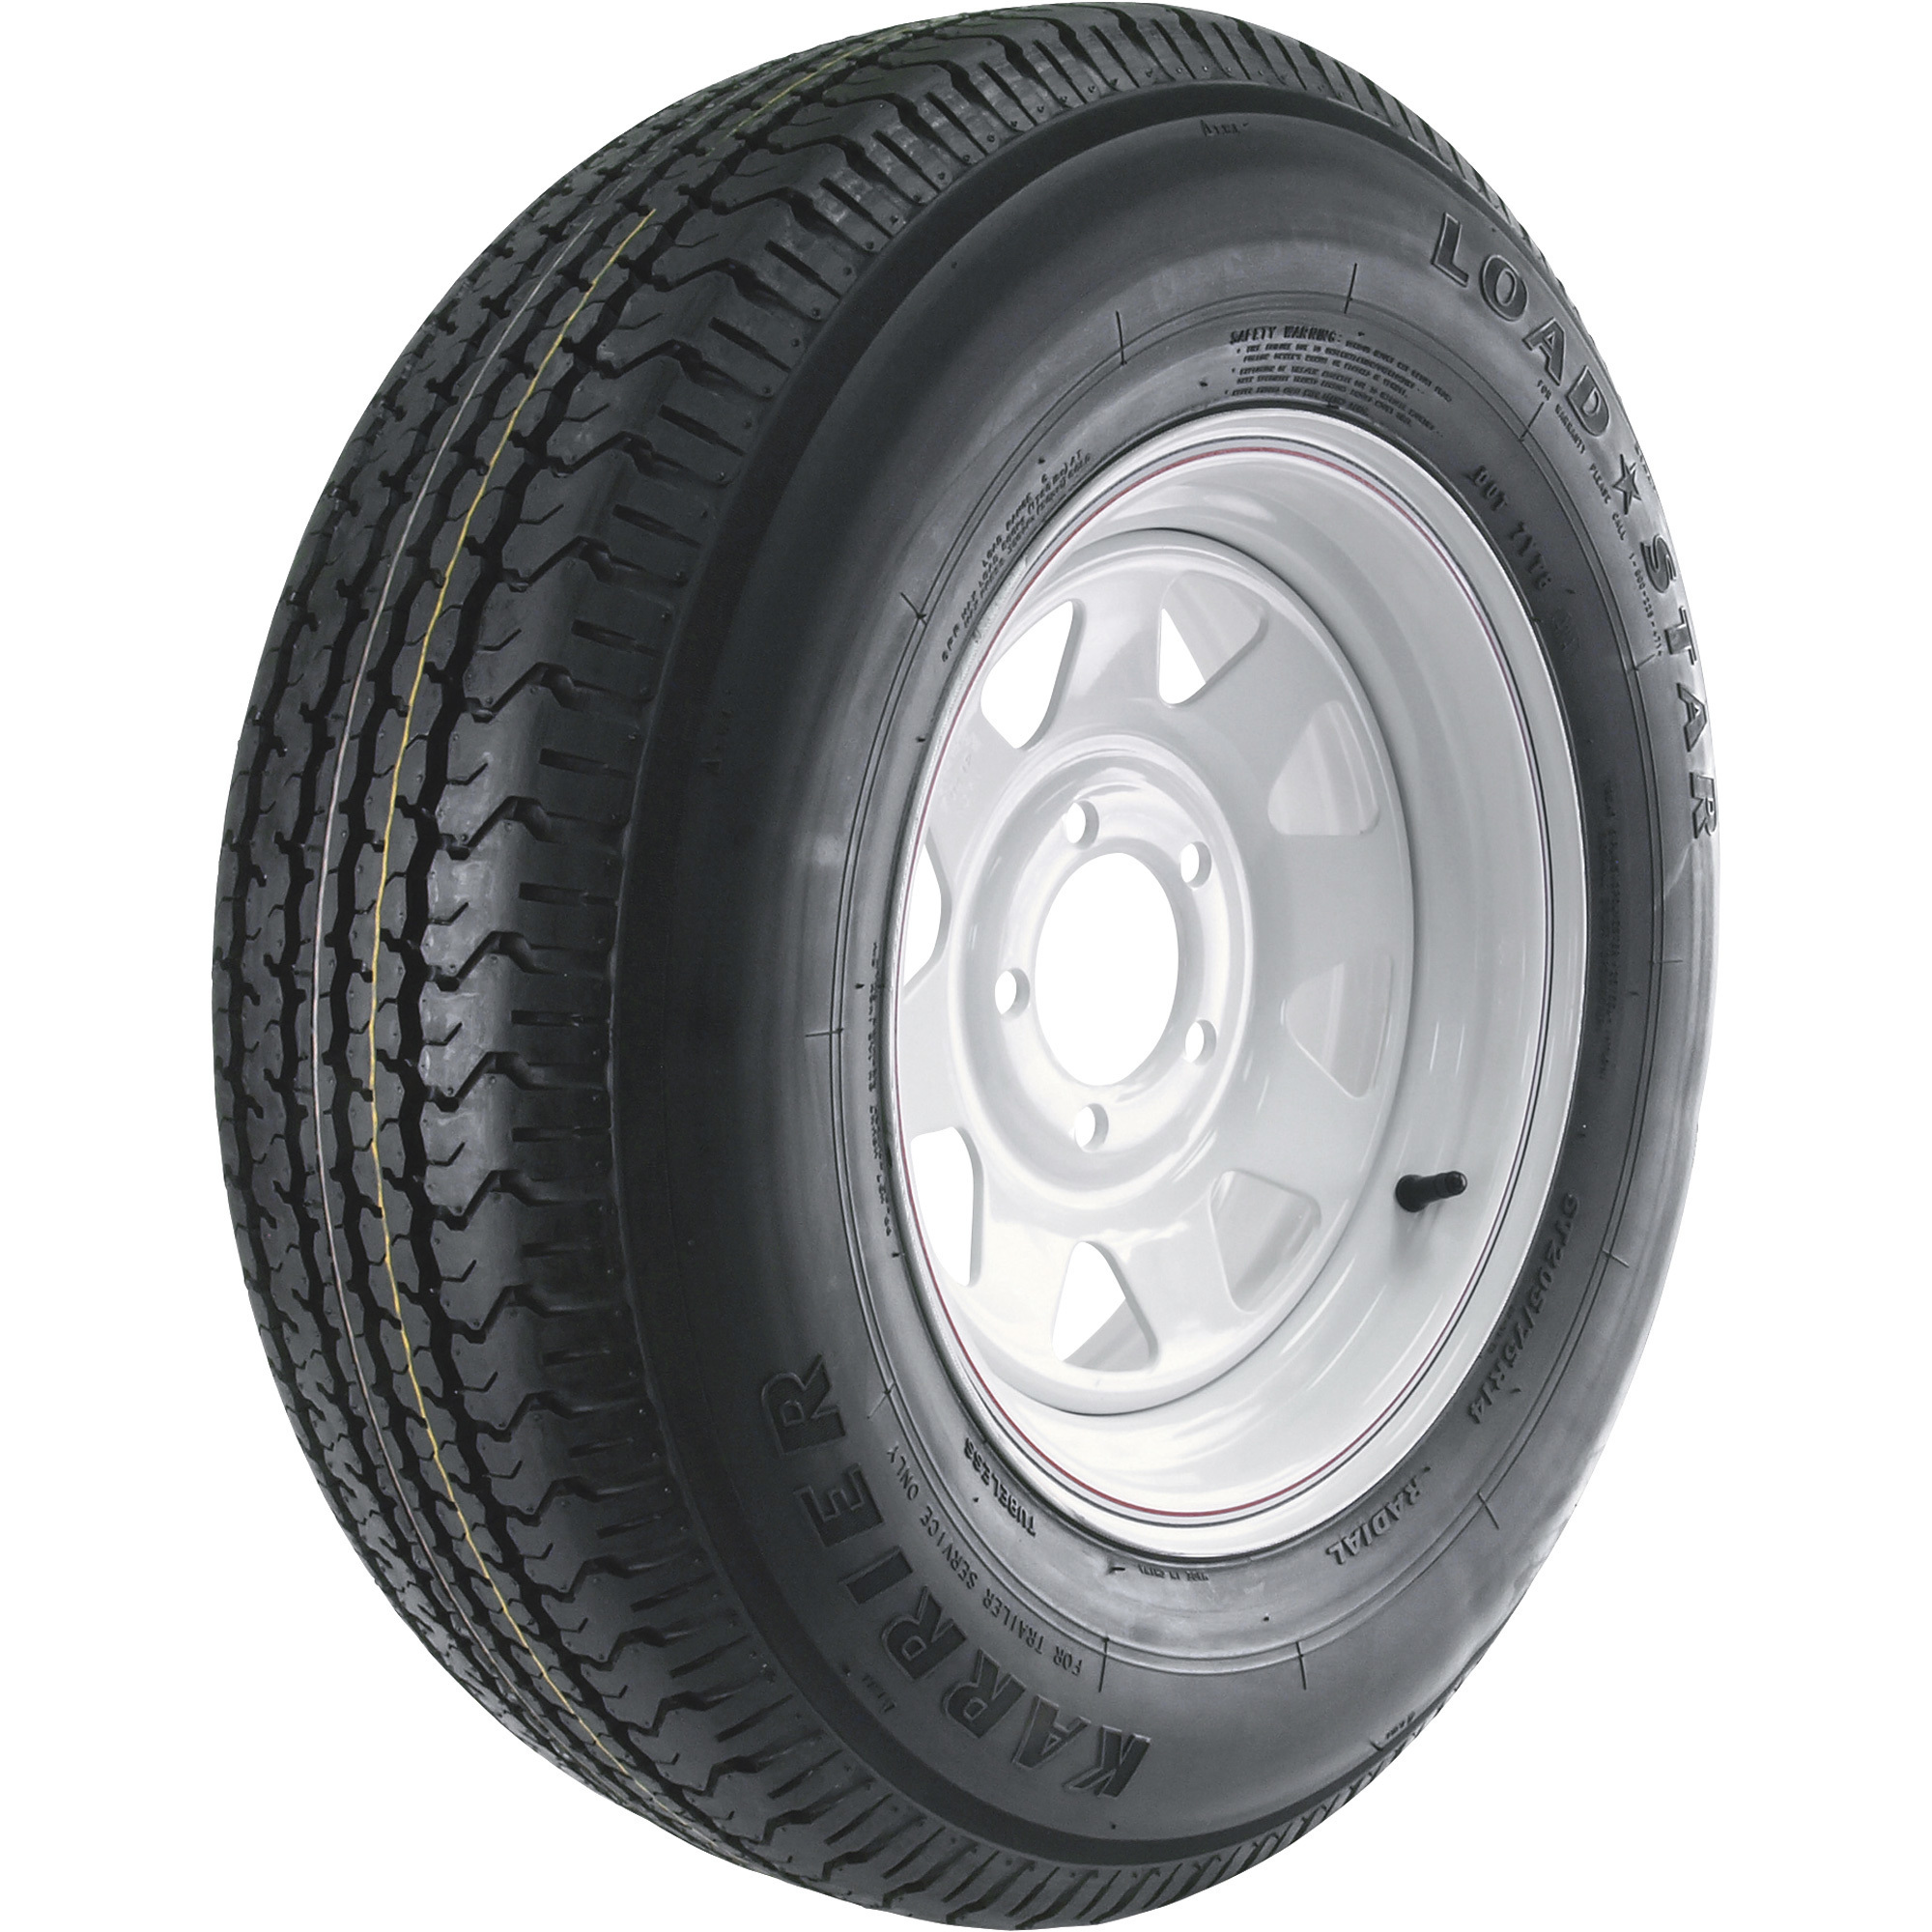 Martin Wheel Carrier Star 14Inch Radial Trailer Tire and Wheel Assembly â ST205/75R-14, 5-Hole, Load Range C, Model DM205R4C-5CIN